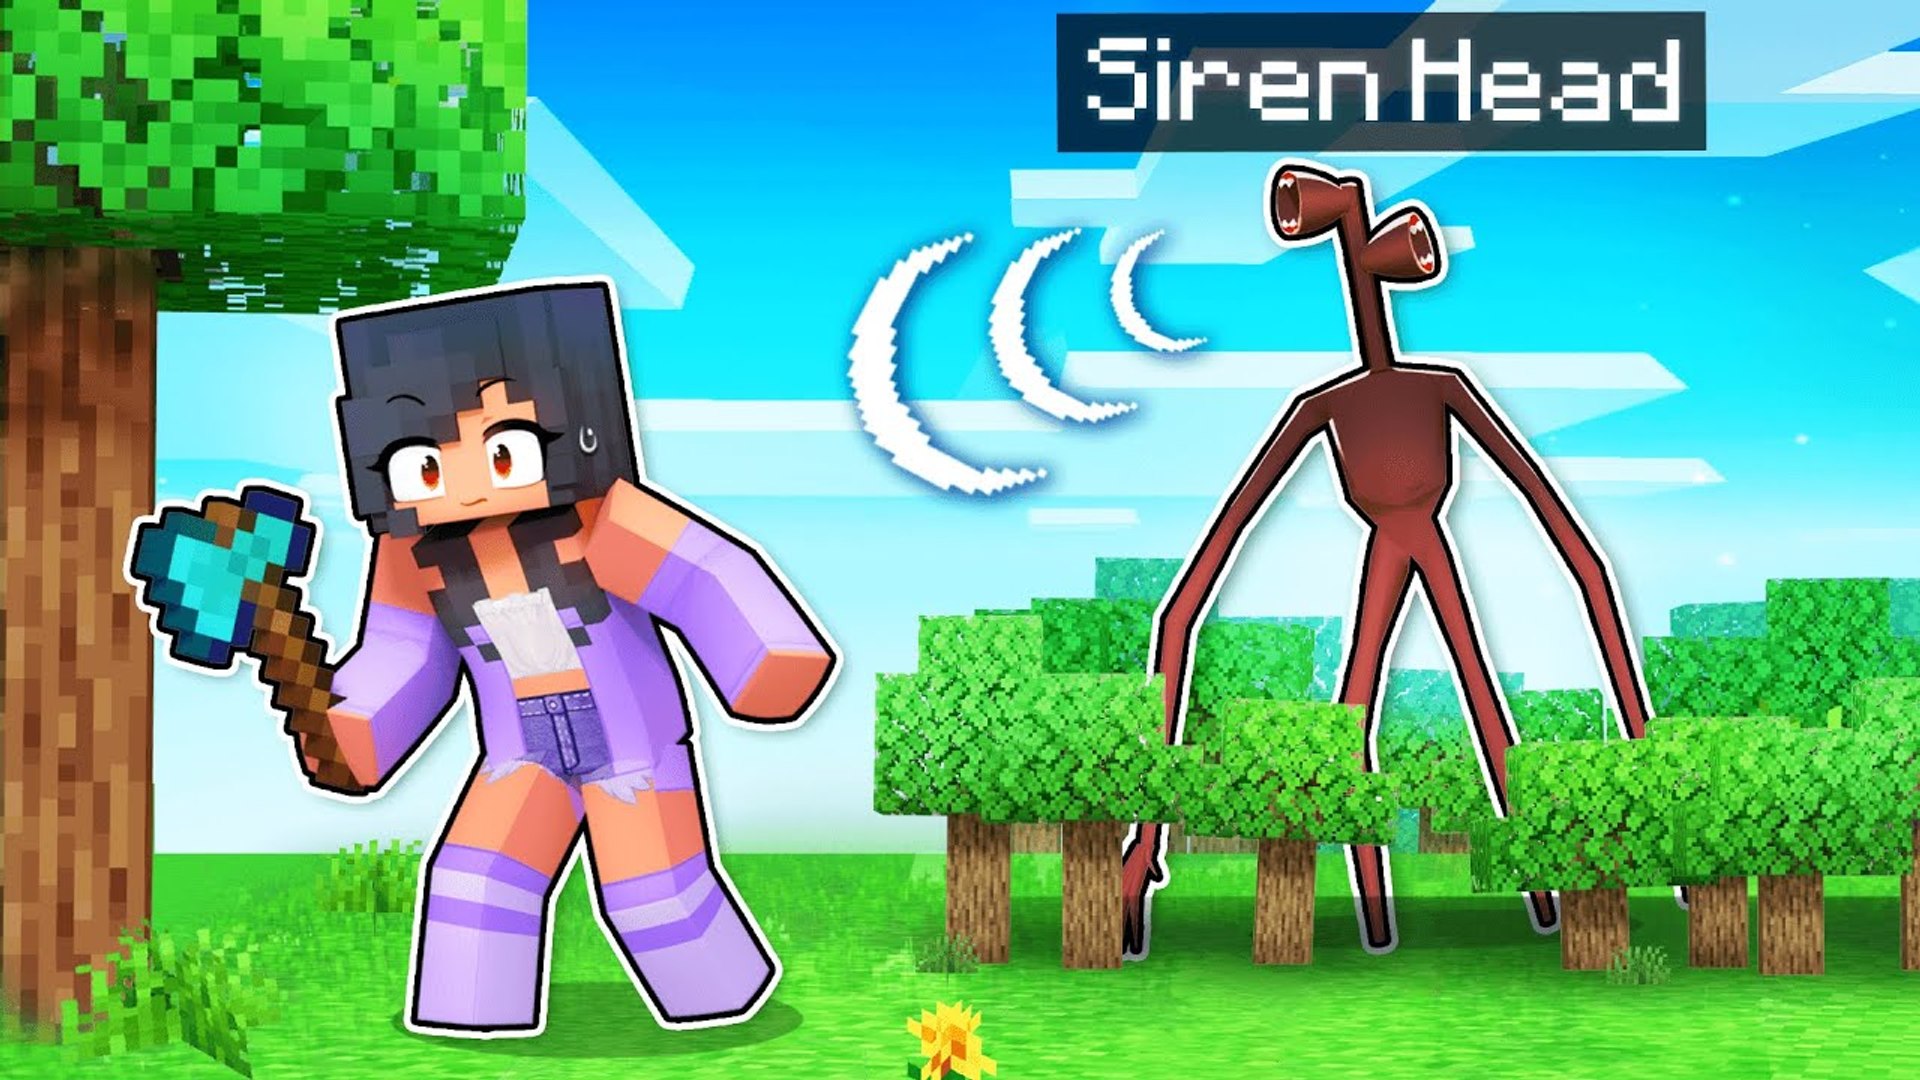 3 NIGHTS With SIREN HEAD In Minecraft! - video Dailymotion